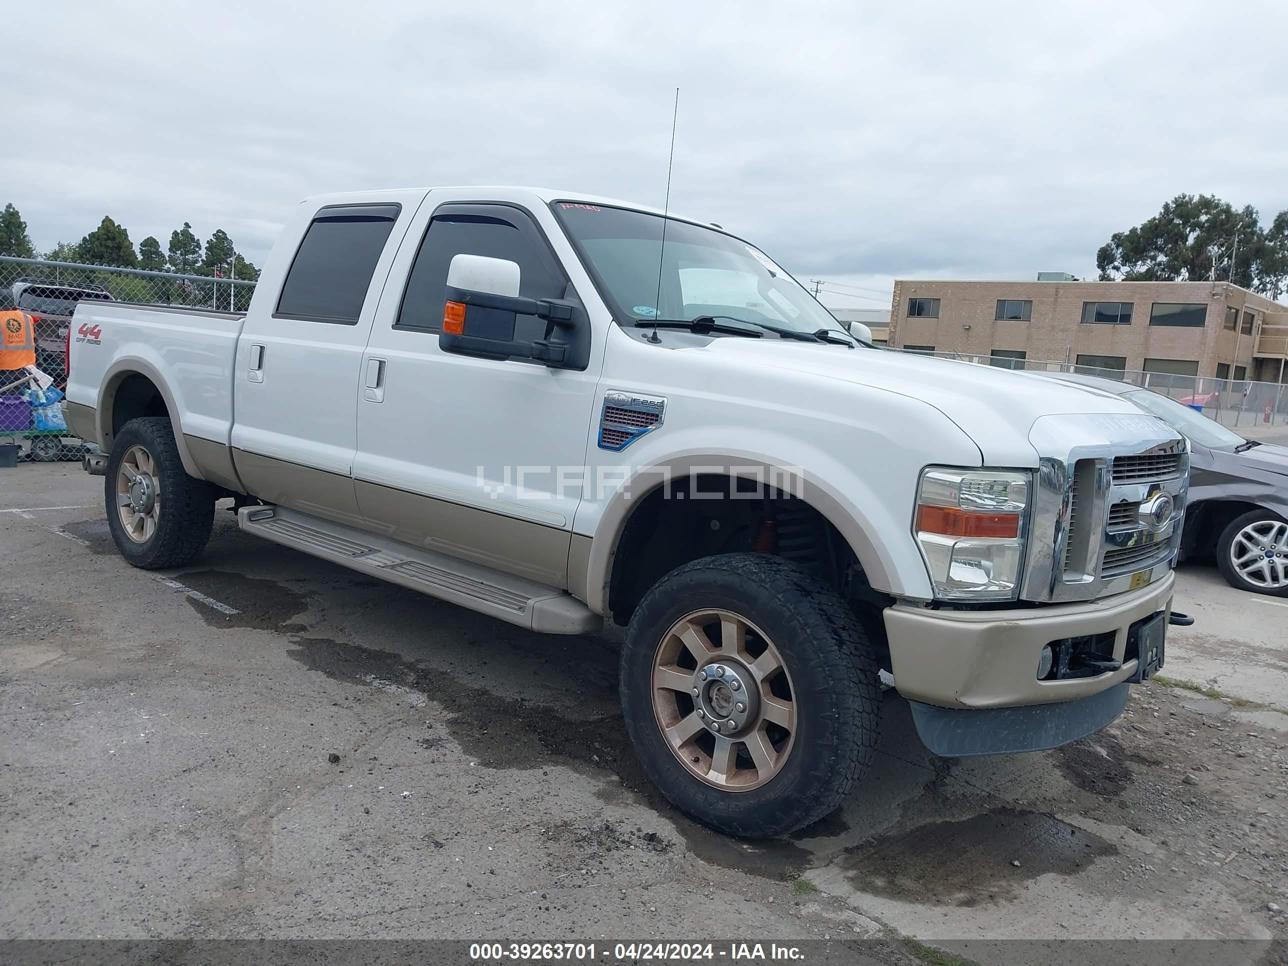 VIN: 1FTSW21R29EB01881 - ford f250